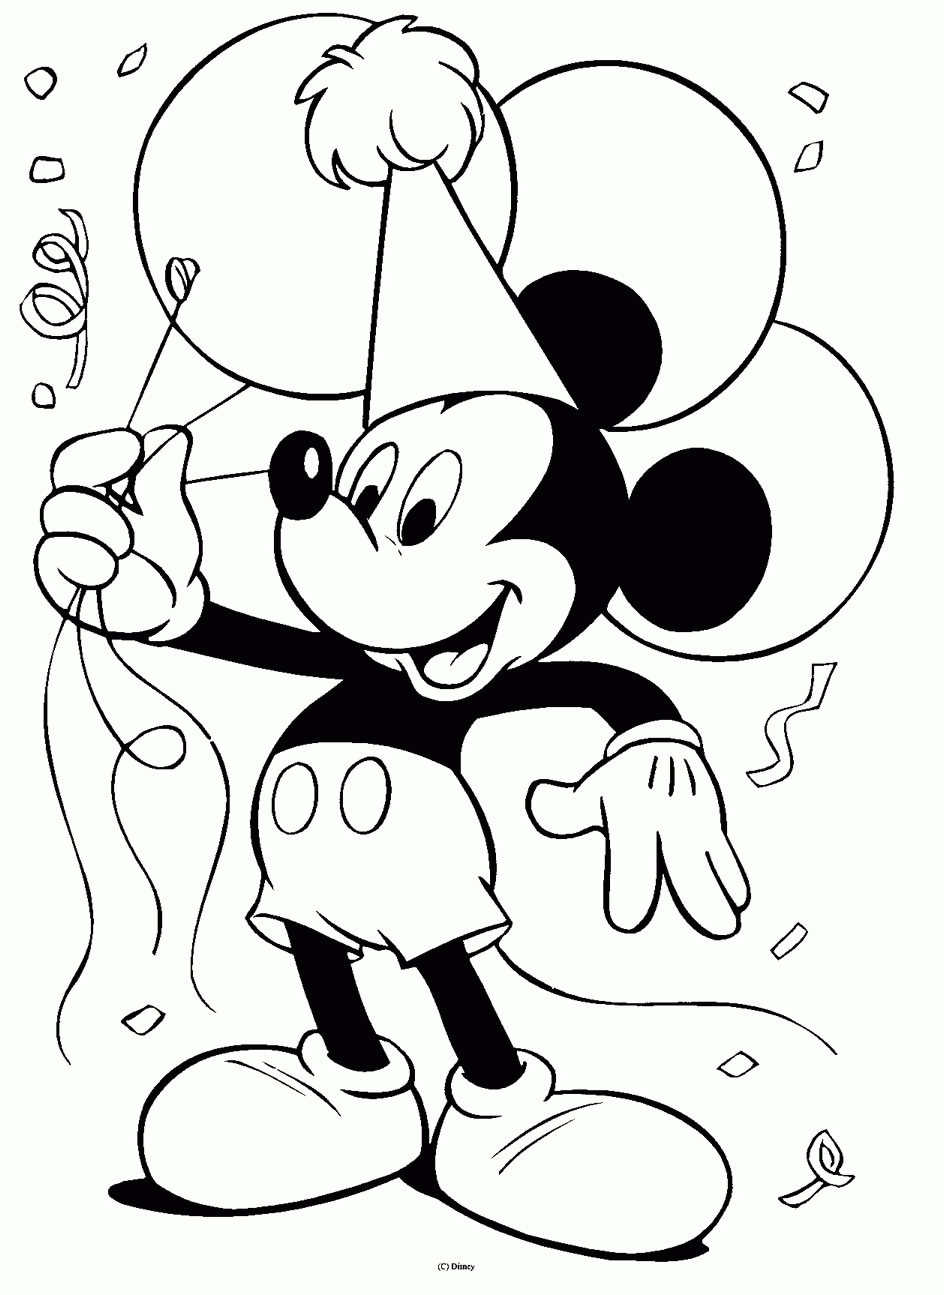 Free Printable Disney Coloring Pages For Kids   Coloring Pages ...